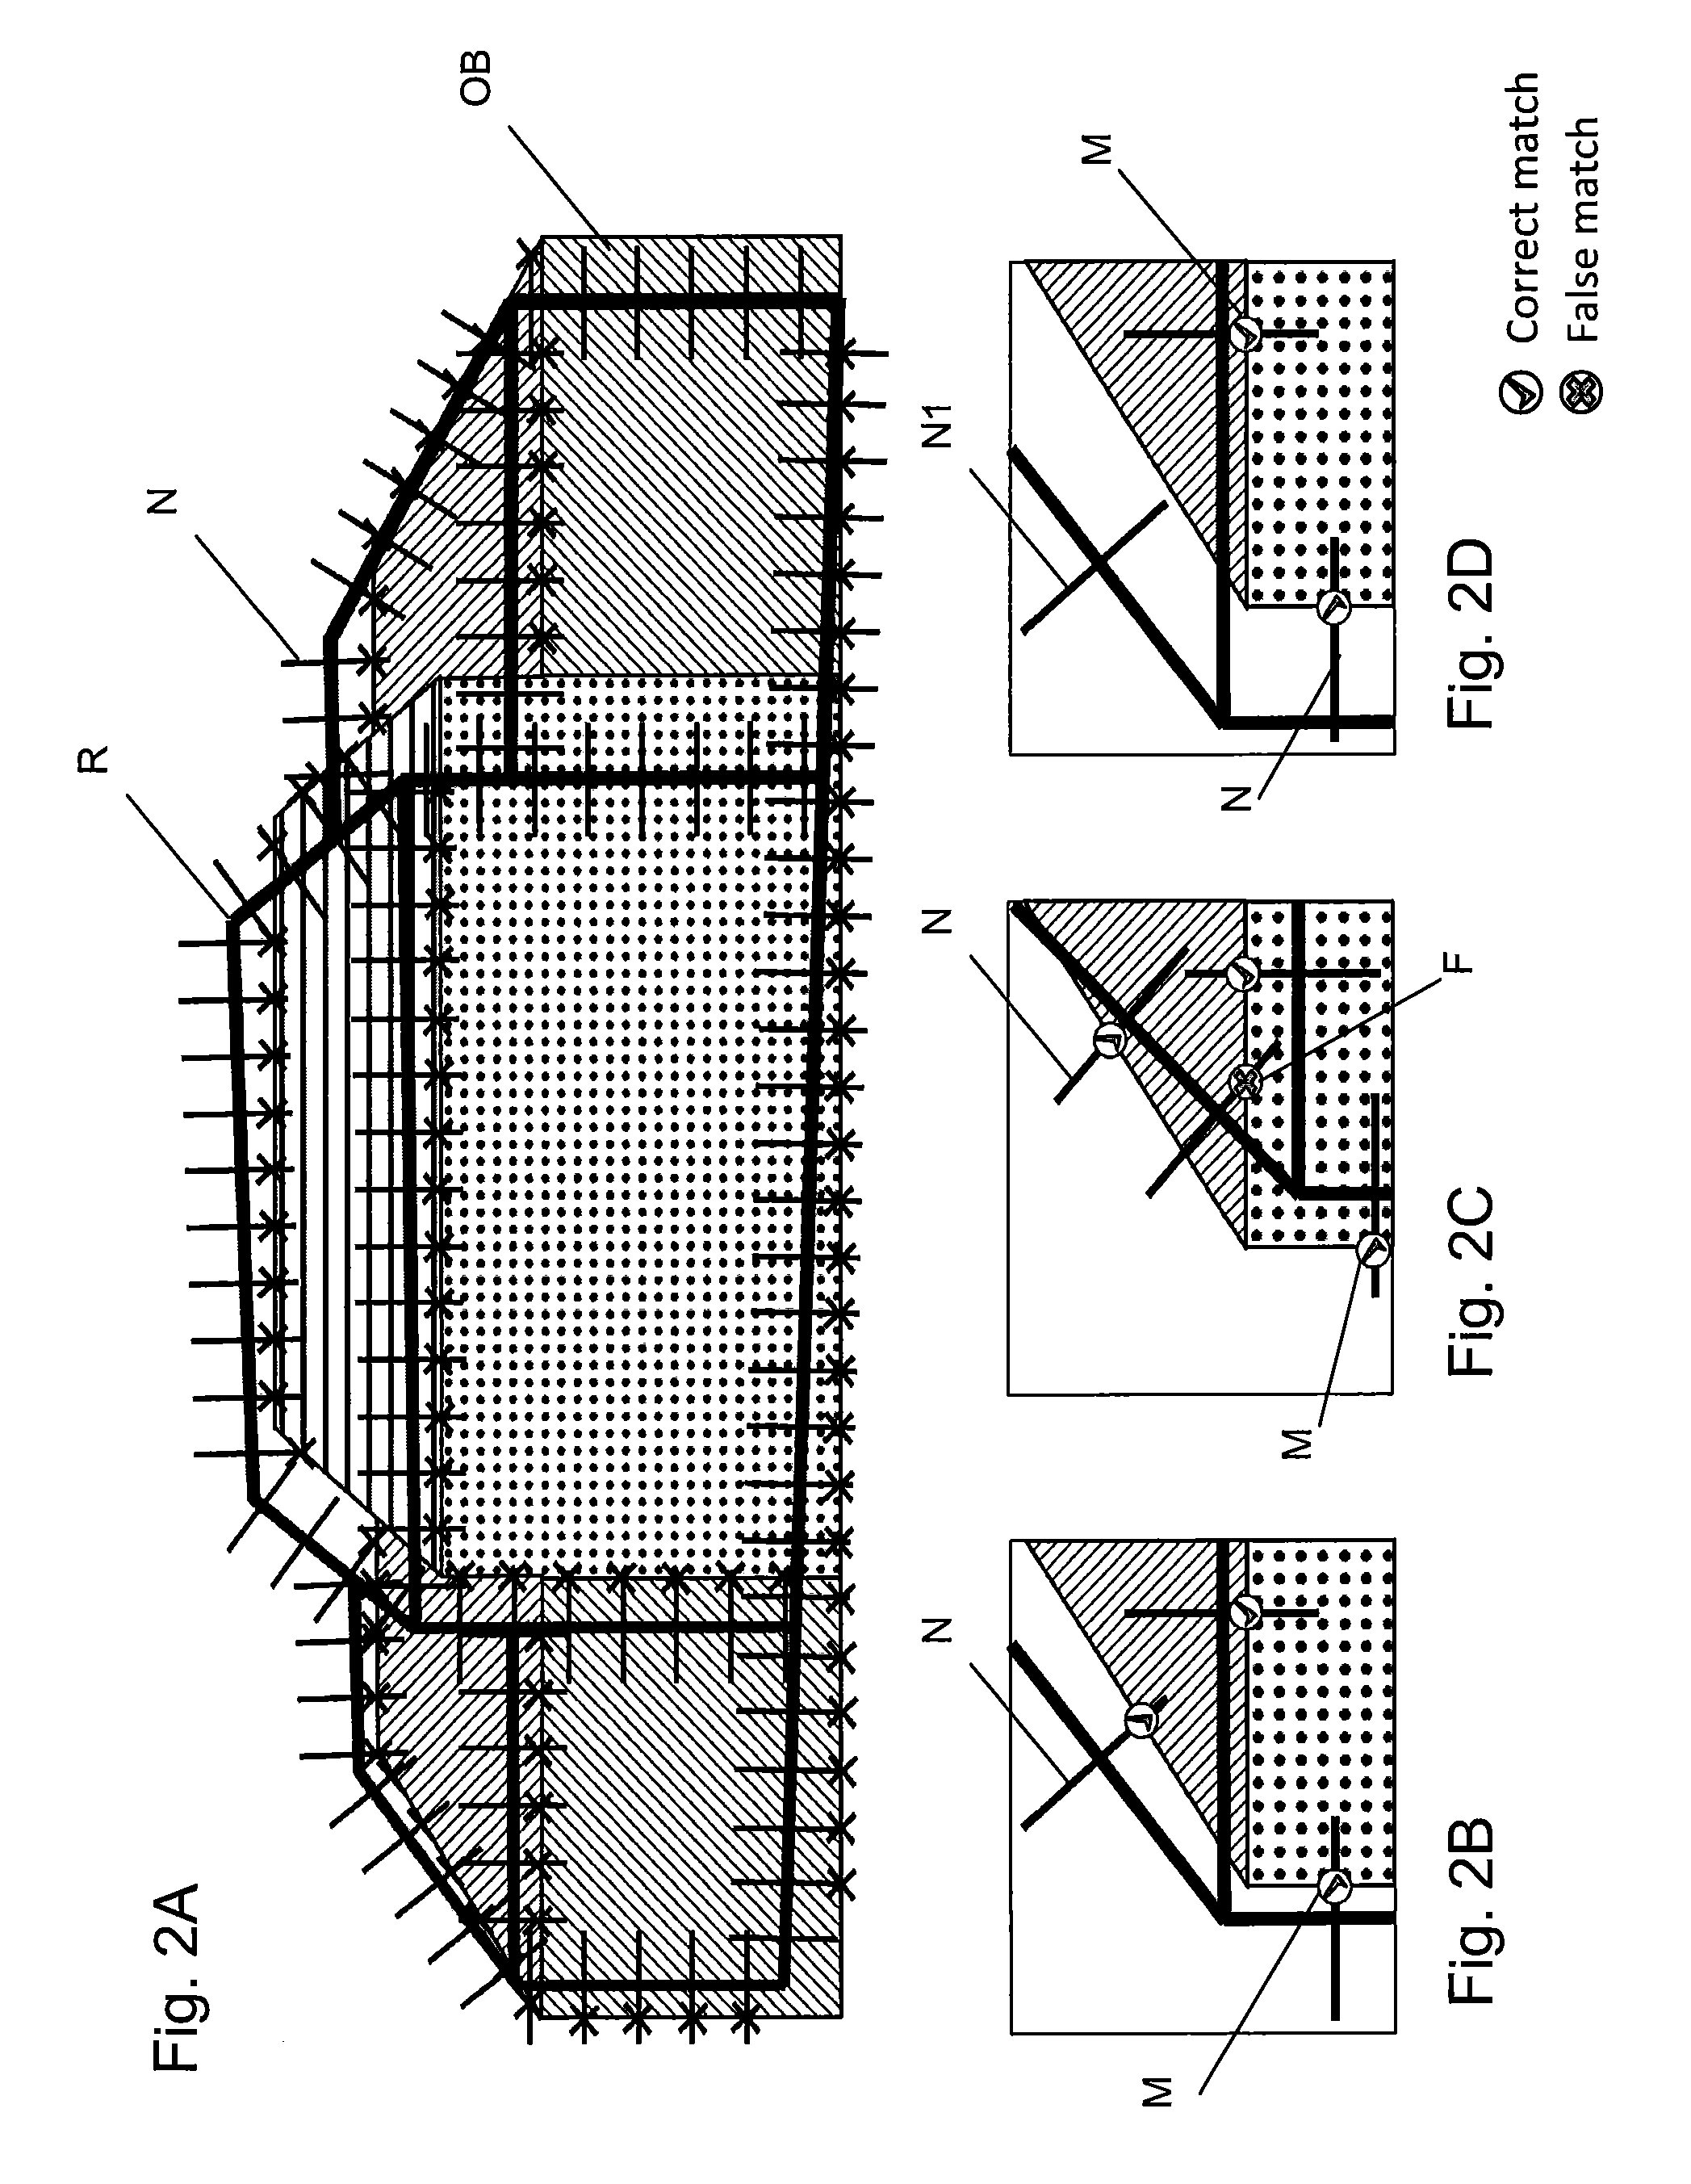 Method of determining a position and orientation of a device associated with a capturing device for capturing at least one image